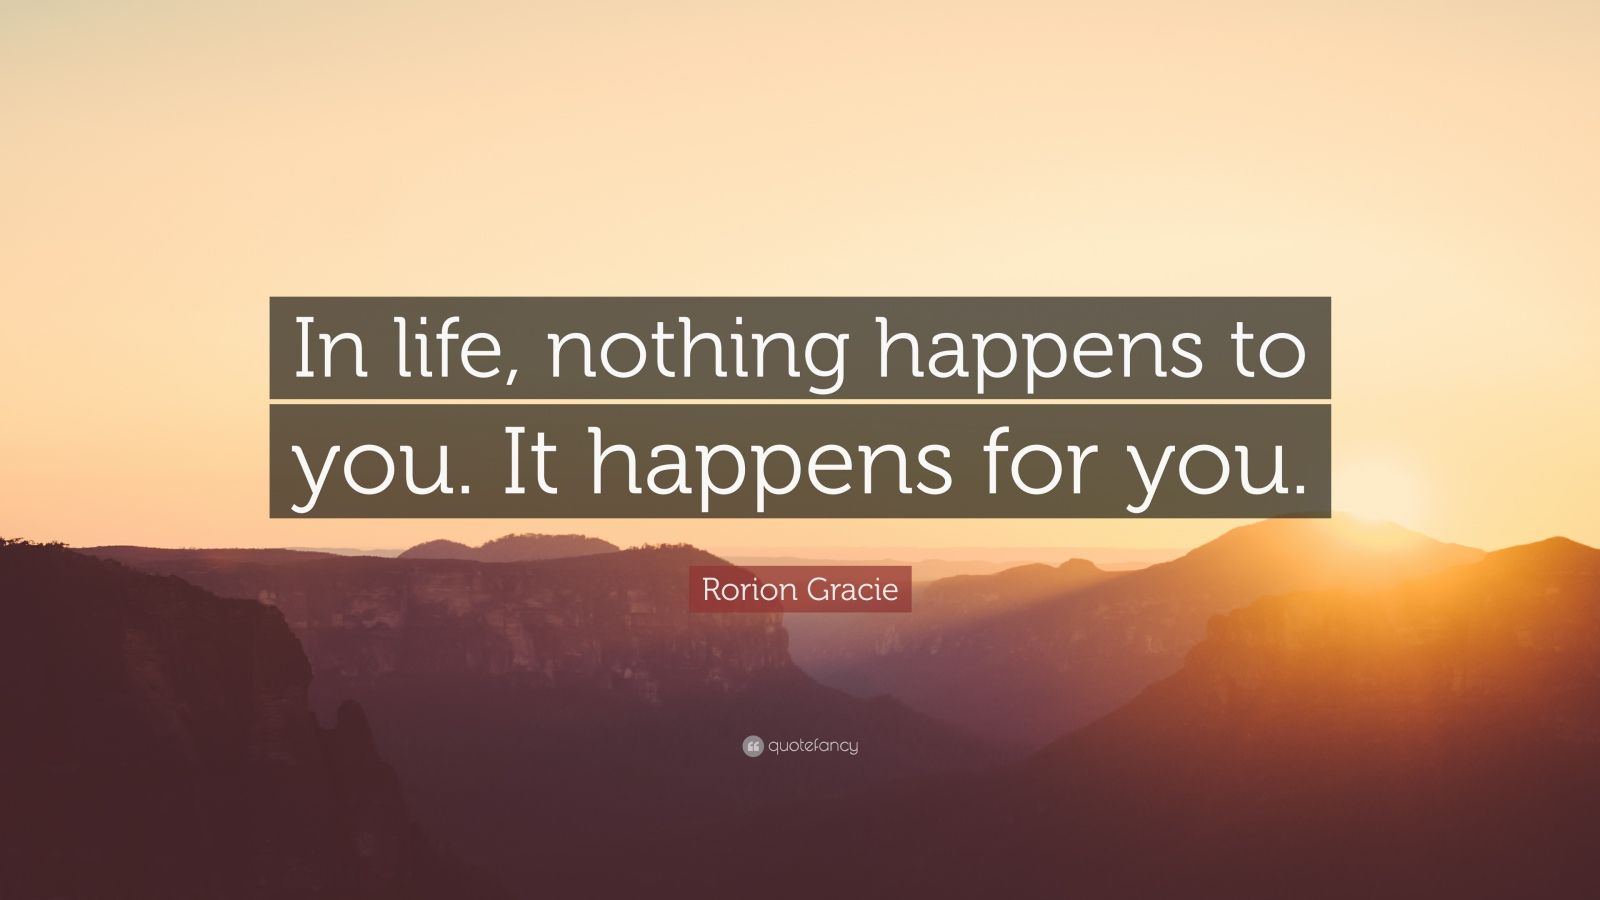 Rorion Gracie Quote: “In life, nothing happens to you. It happens for ... Nothing Happens Before Its Time Quotes